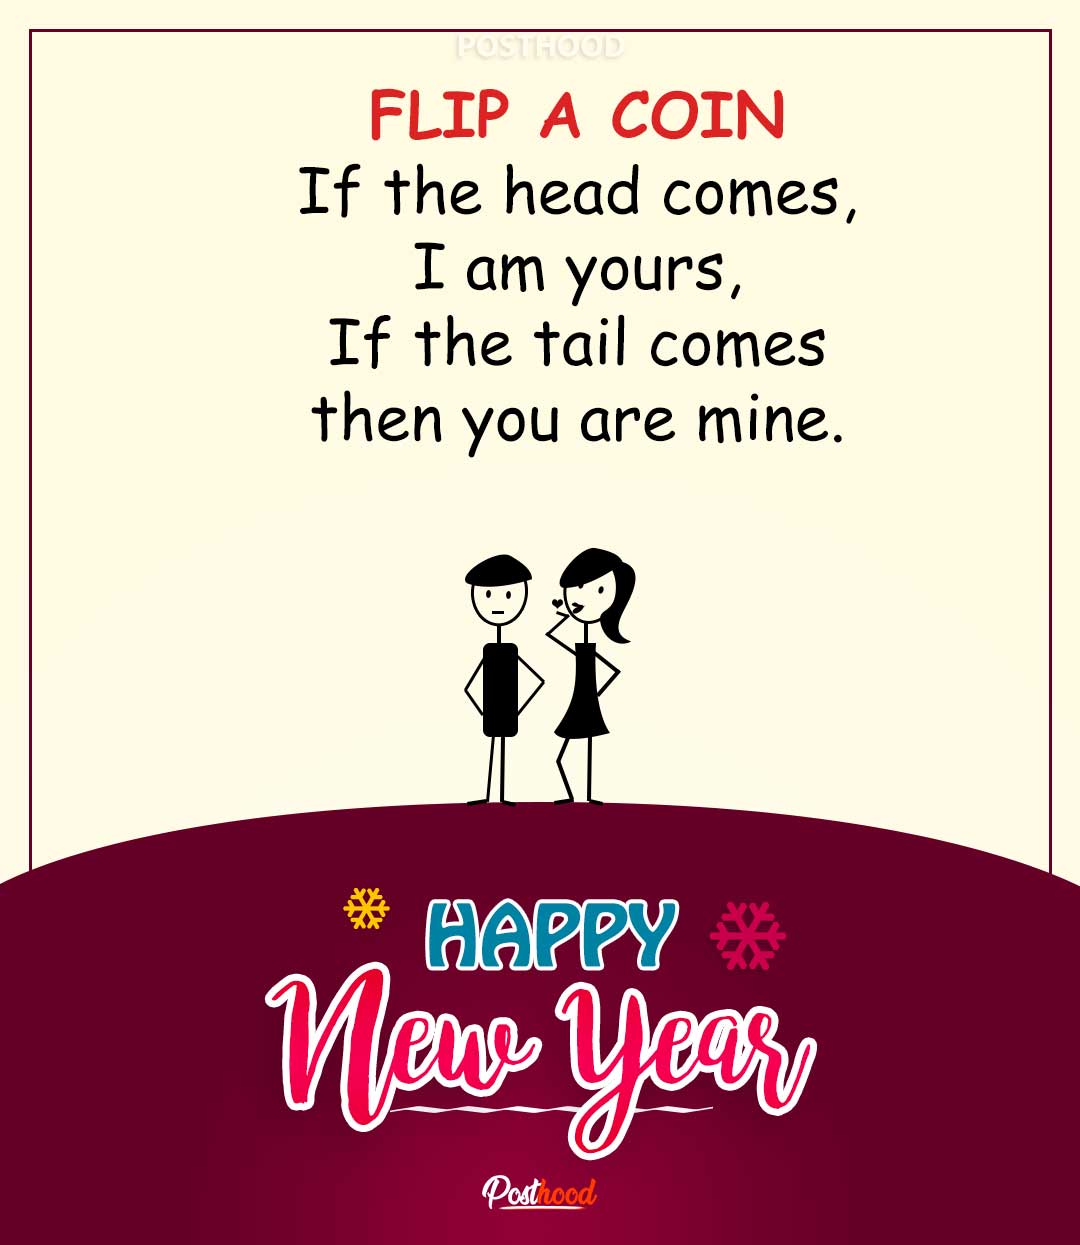 Funny New Year wishes for your girlfriend. Send your warmly New Year wishes in fun ways to add lost of laughs! 